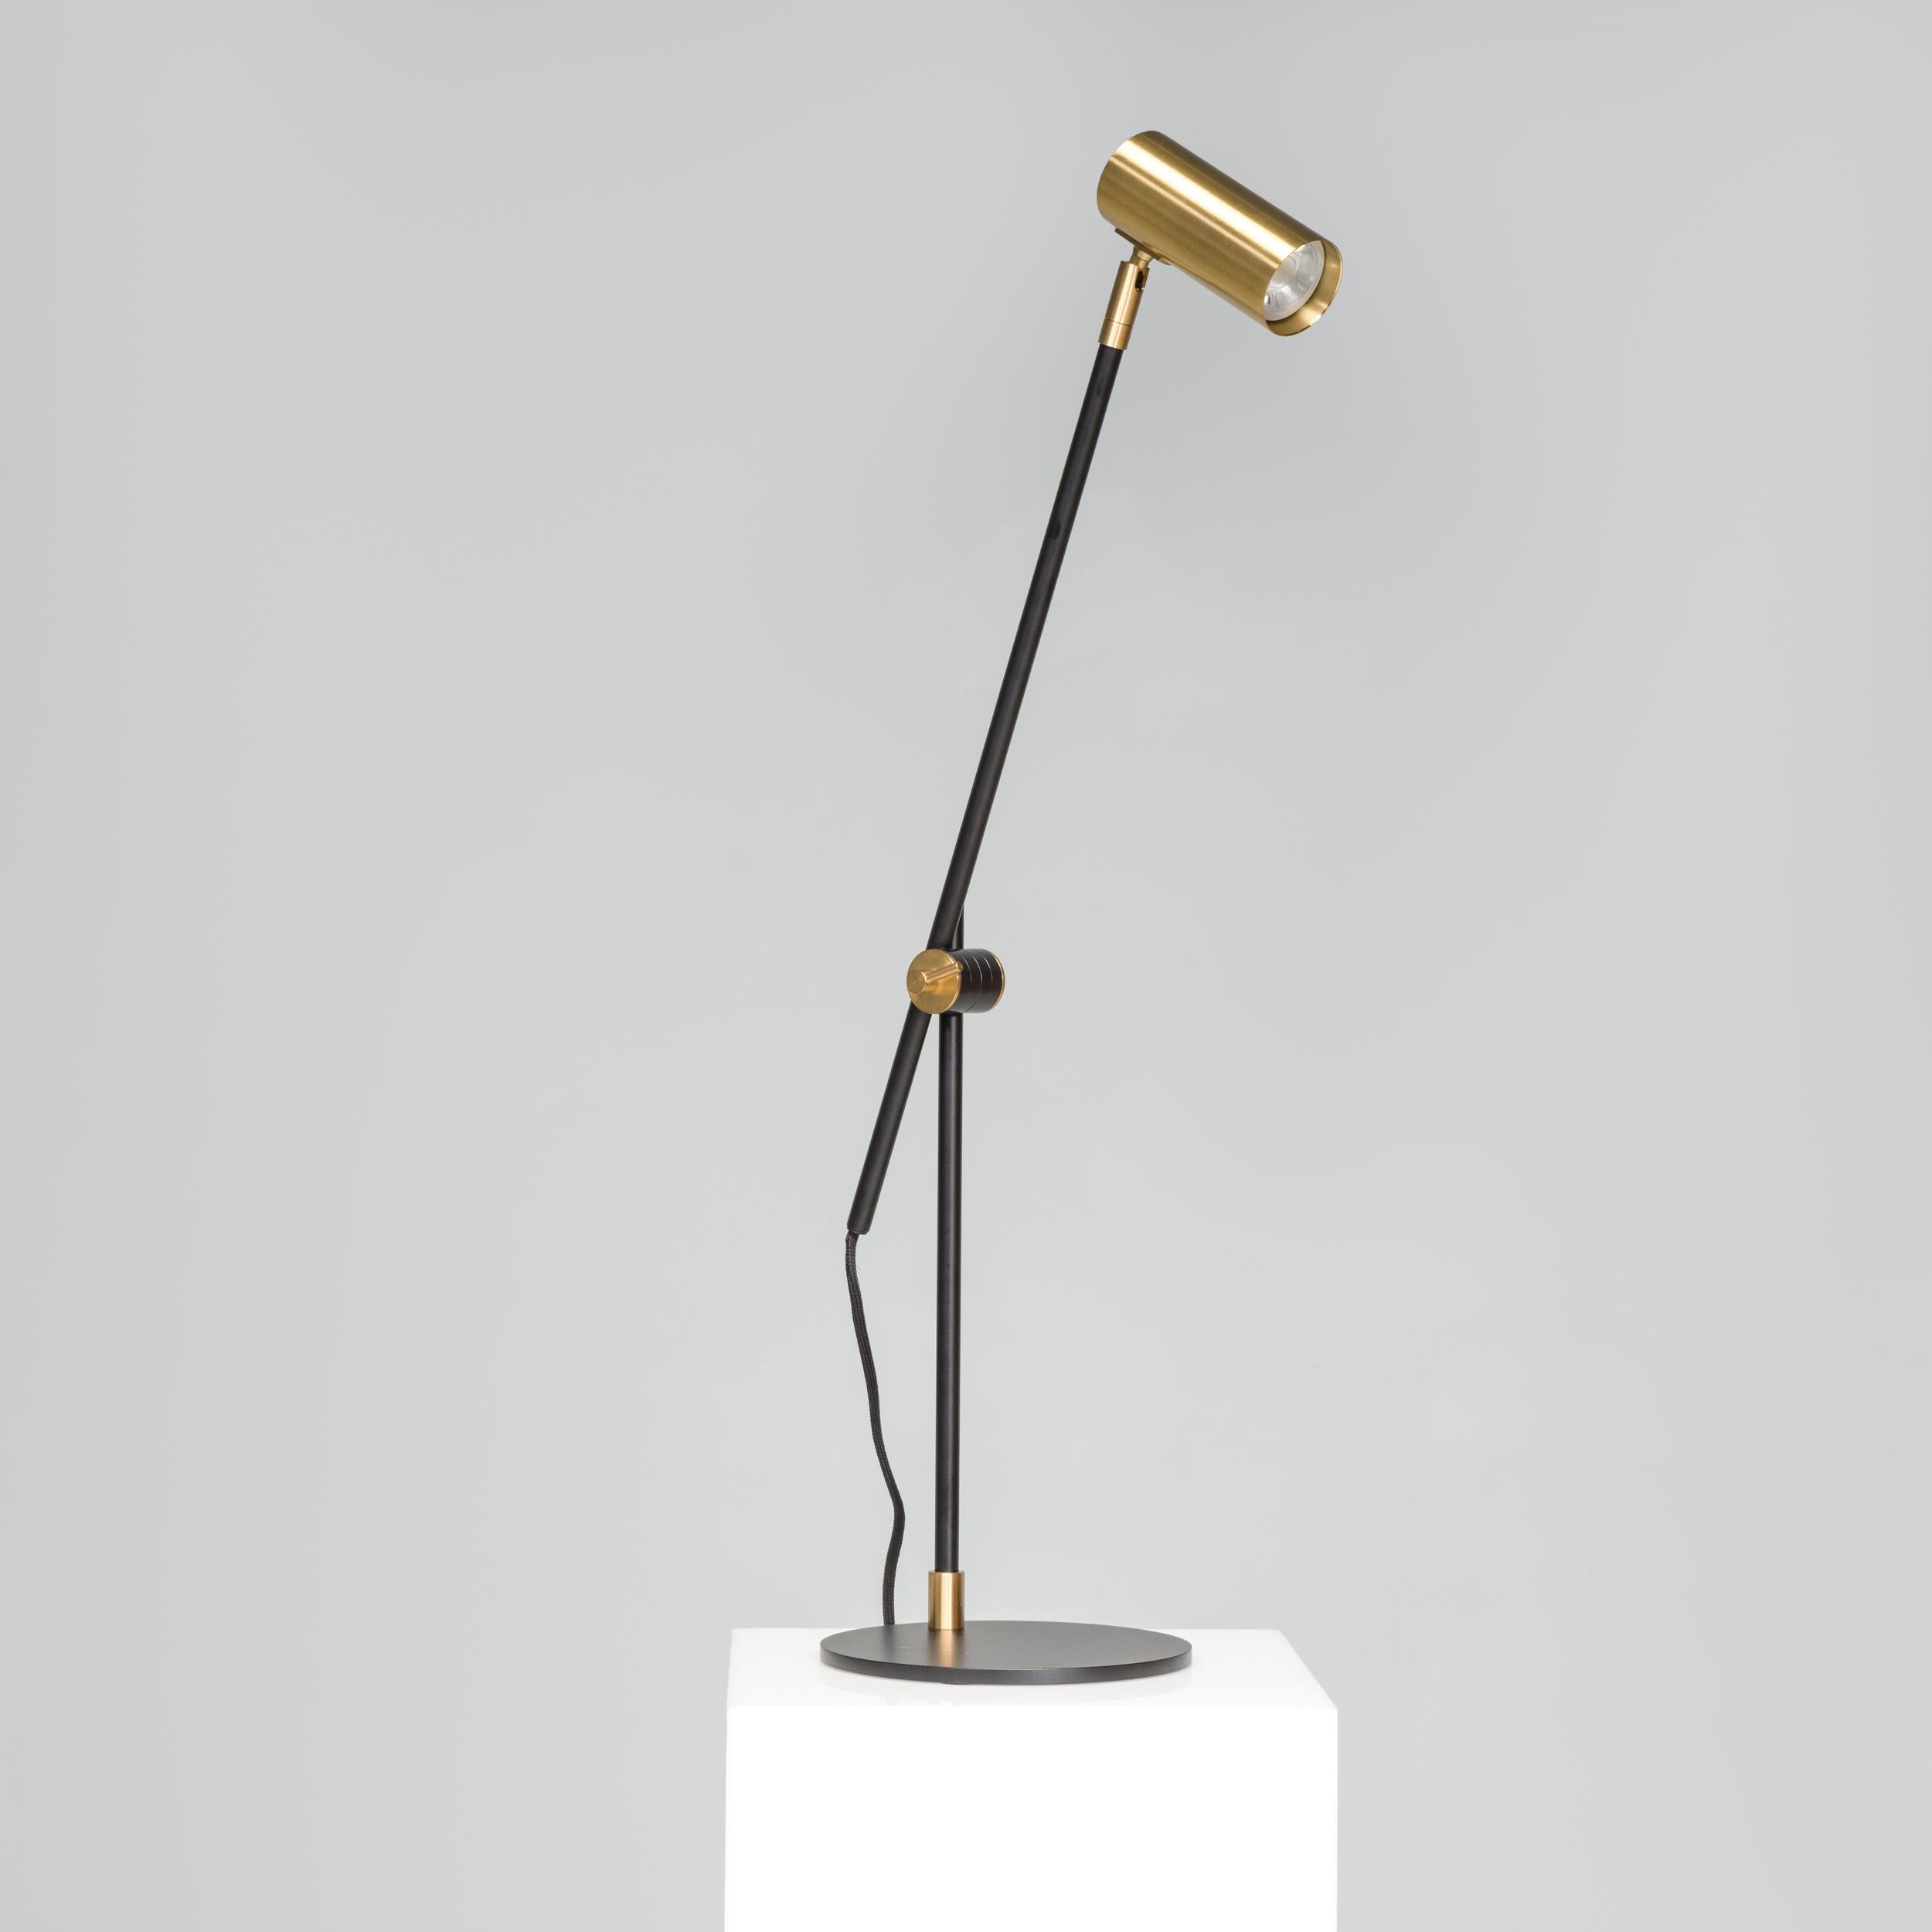 Designed by Niclas Hoflin, the Lektor desk lamp features a supportive, flat and circular iron base which offers a practical and contrasting shape to the rest of the lights design. The sleek and elegant structure is constructed from brass for a